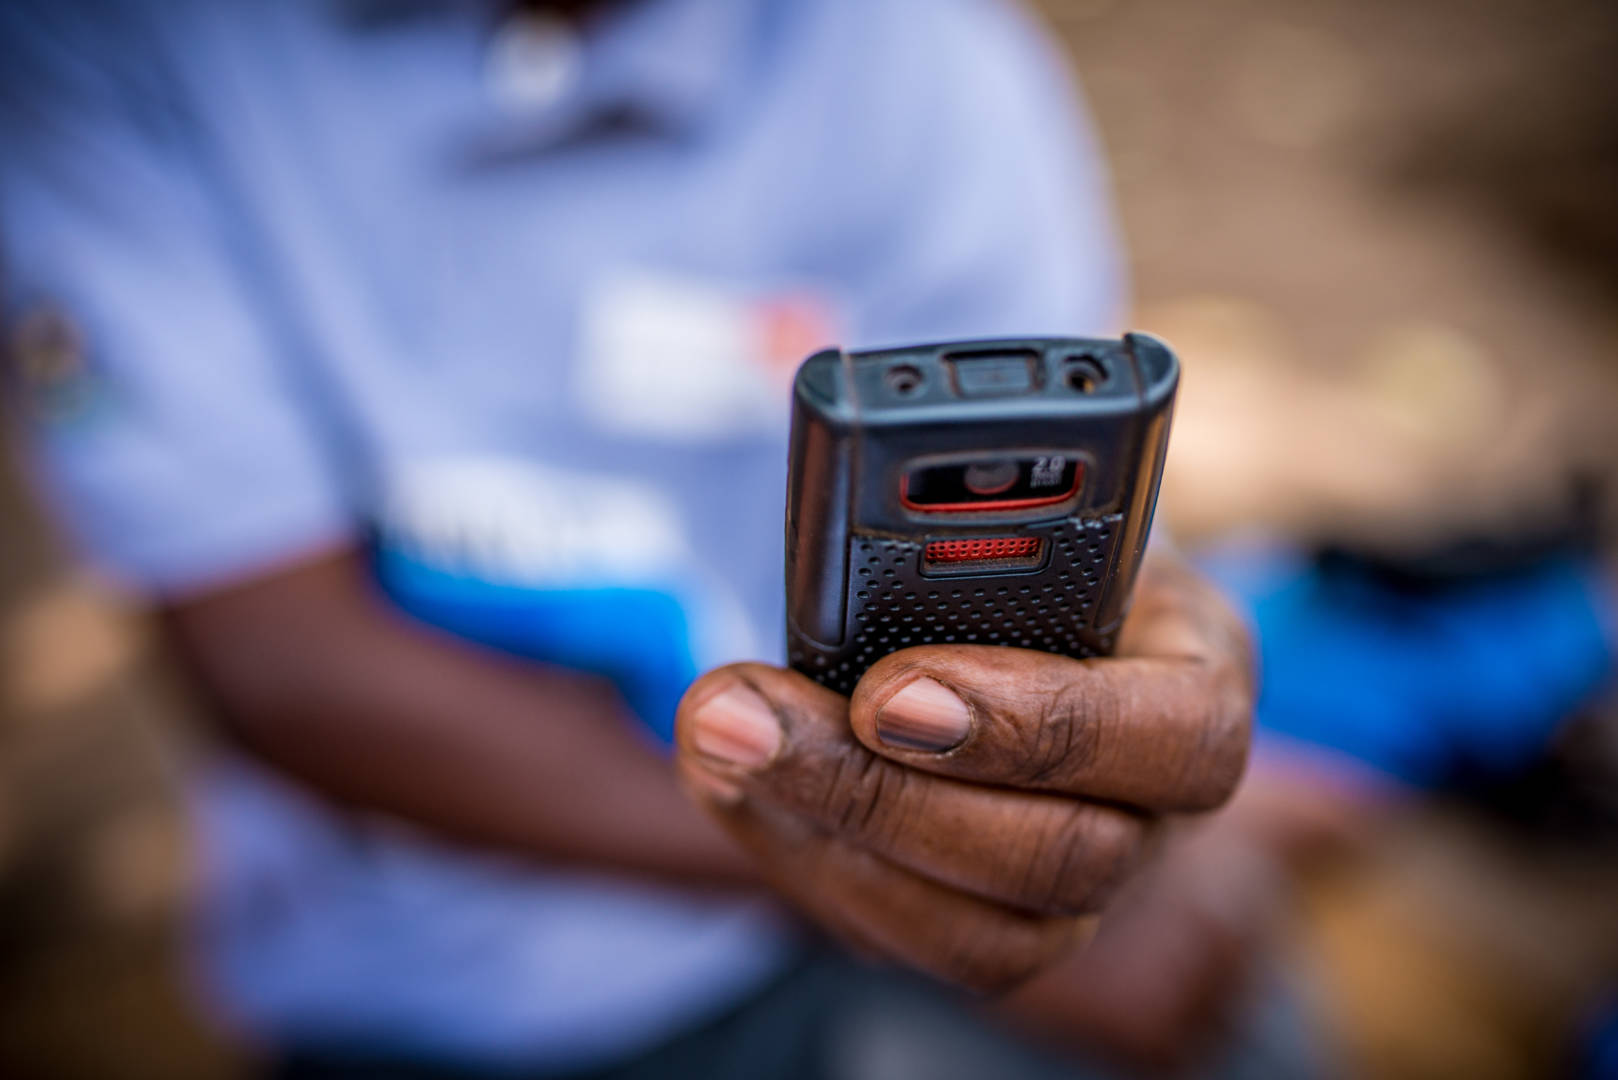 Mobile health technology gives World Vision an unrivalled opportunity to improve people's health, especially in countries where access to healthcare is severly limited.